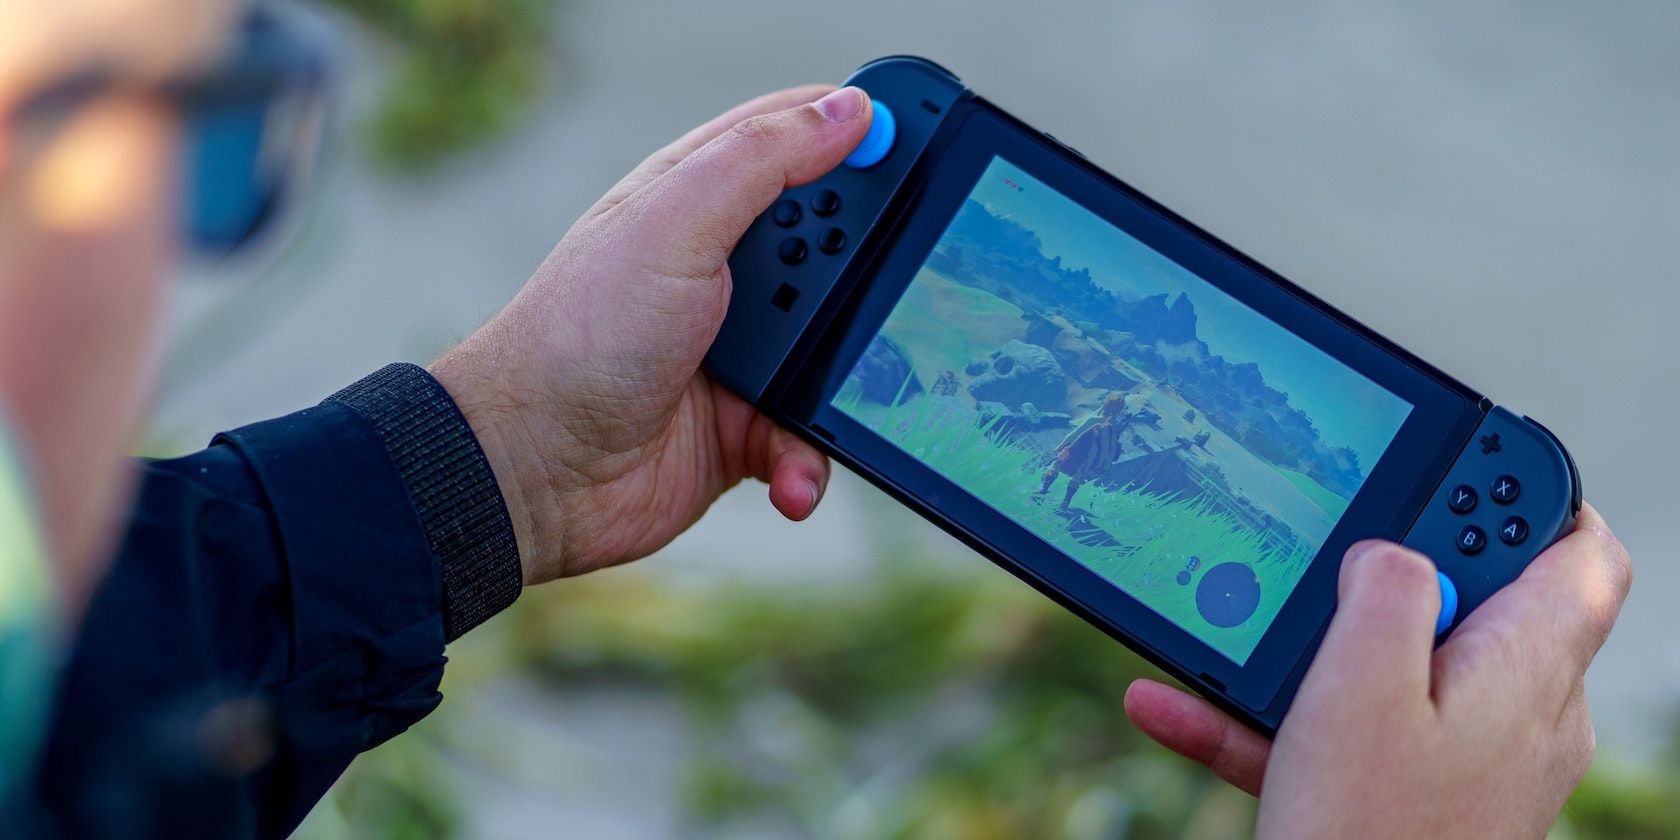 person playing Breath of the Wild on the Nintendo Switch in handheld mode